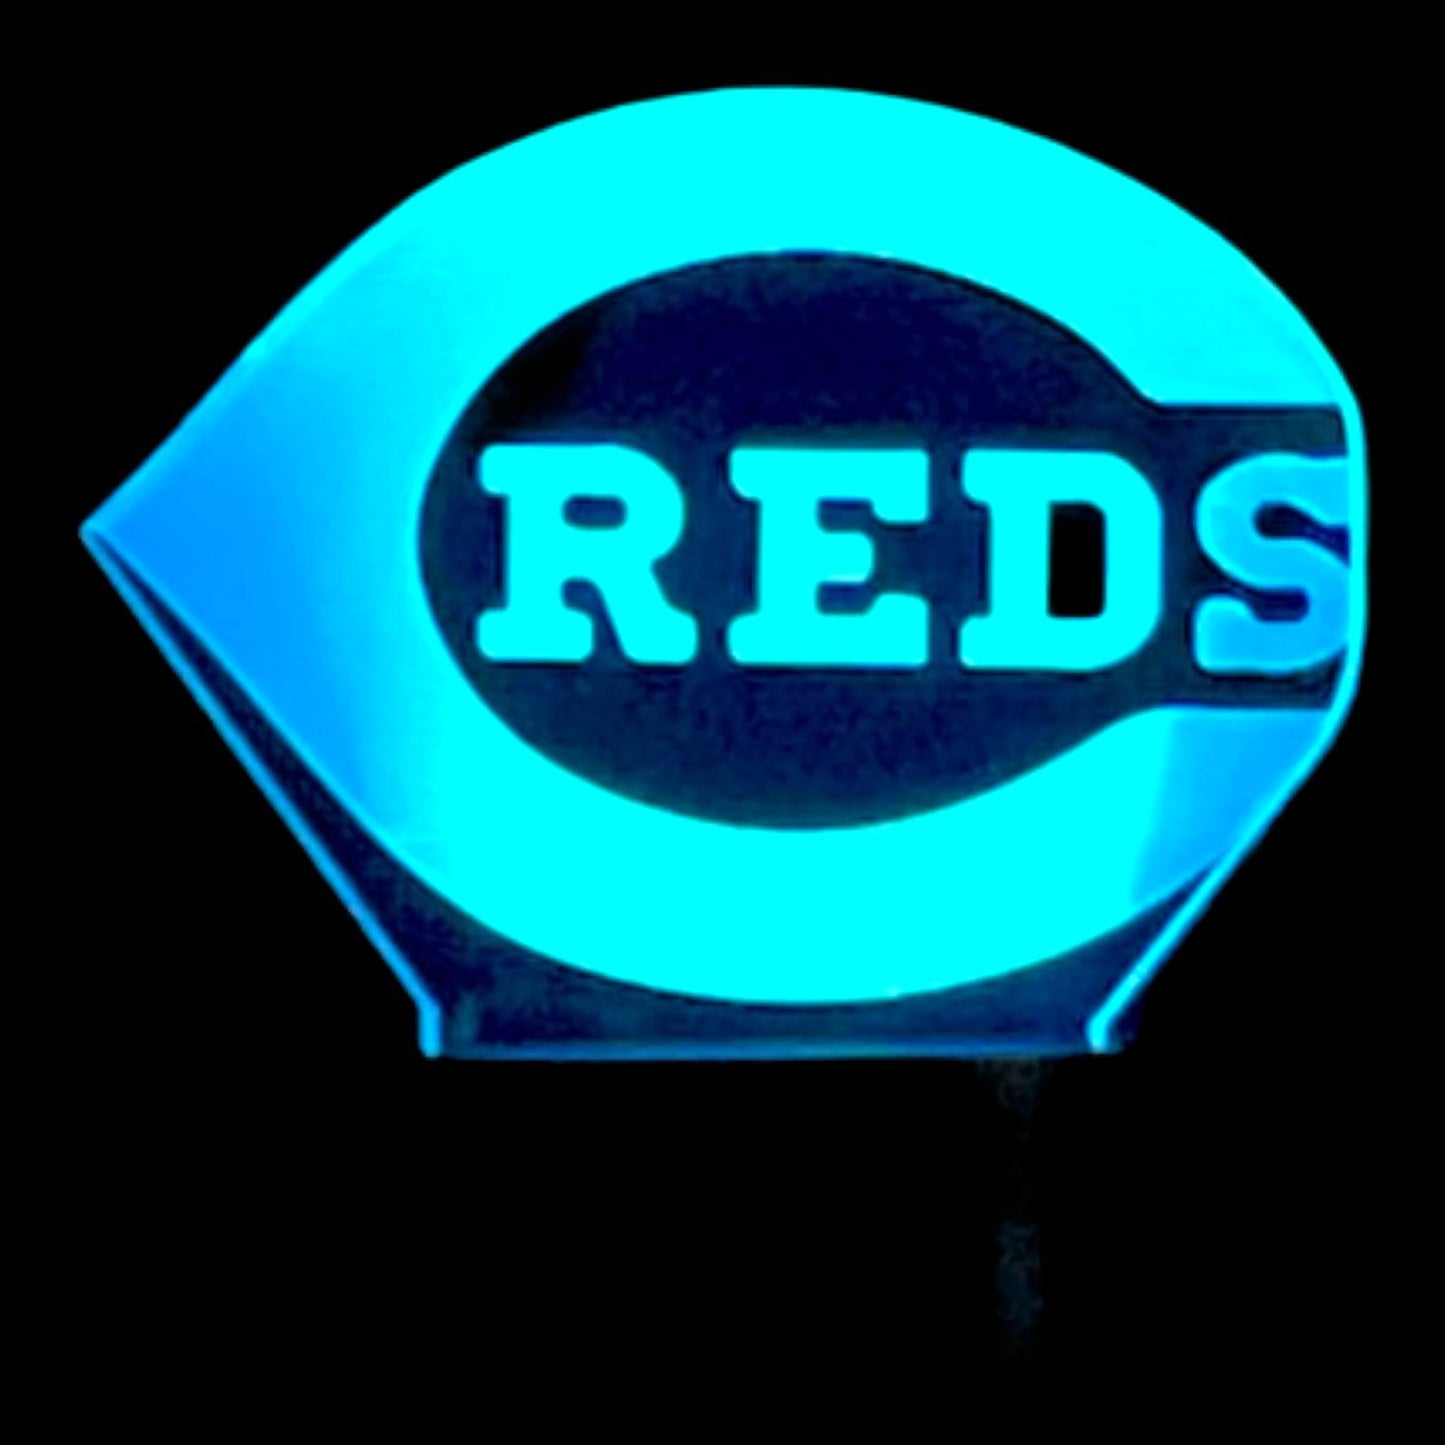 Cincinnati Reds 3D LED Night-Light 7 Color Changing Lamp w/ Touch Switch